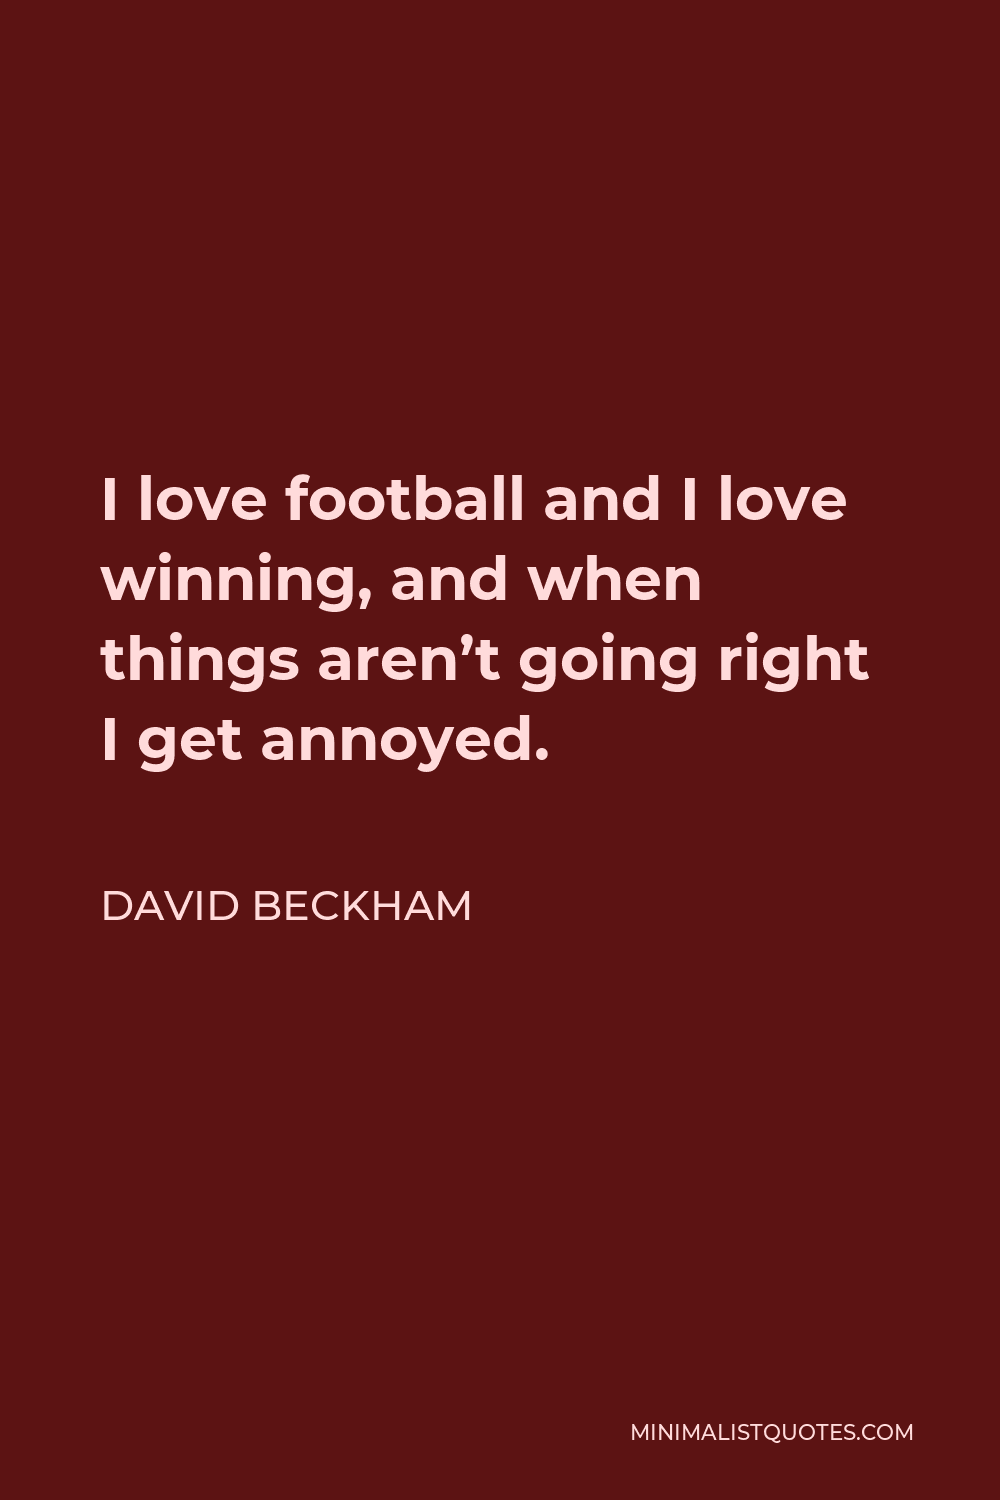 David Beckham Quote - I love football and I love winning, and when things aren’t going right I get annoyed.